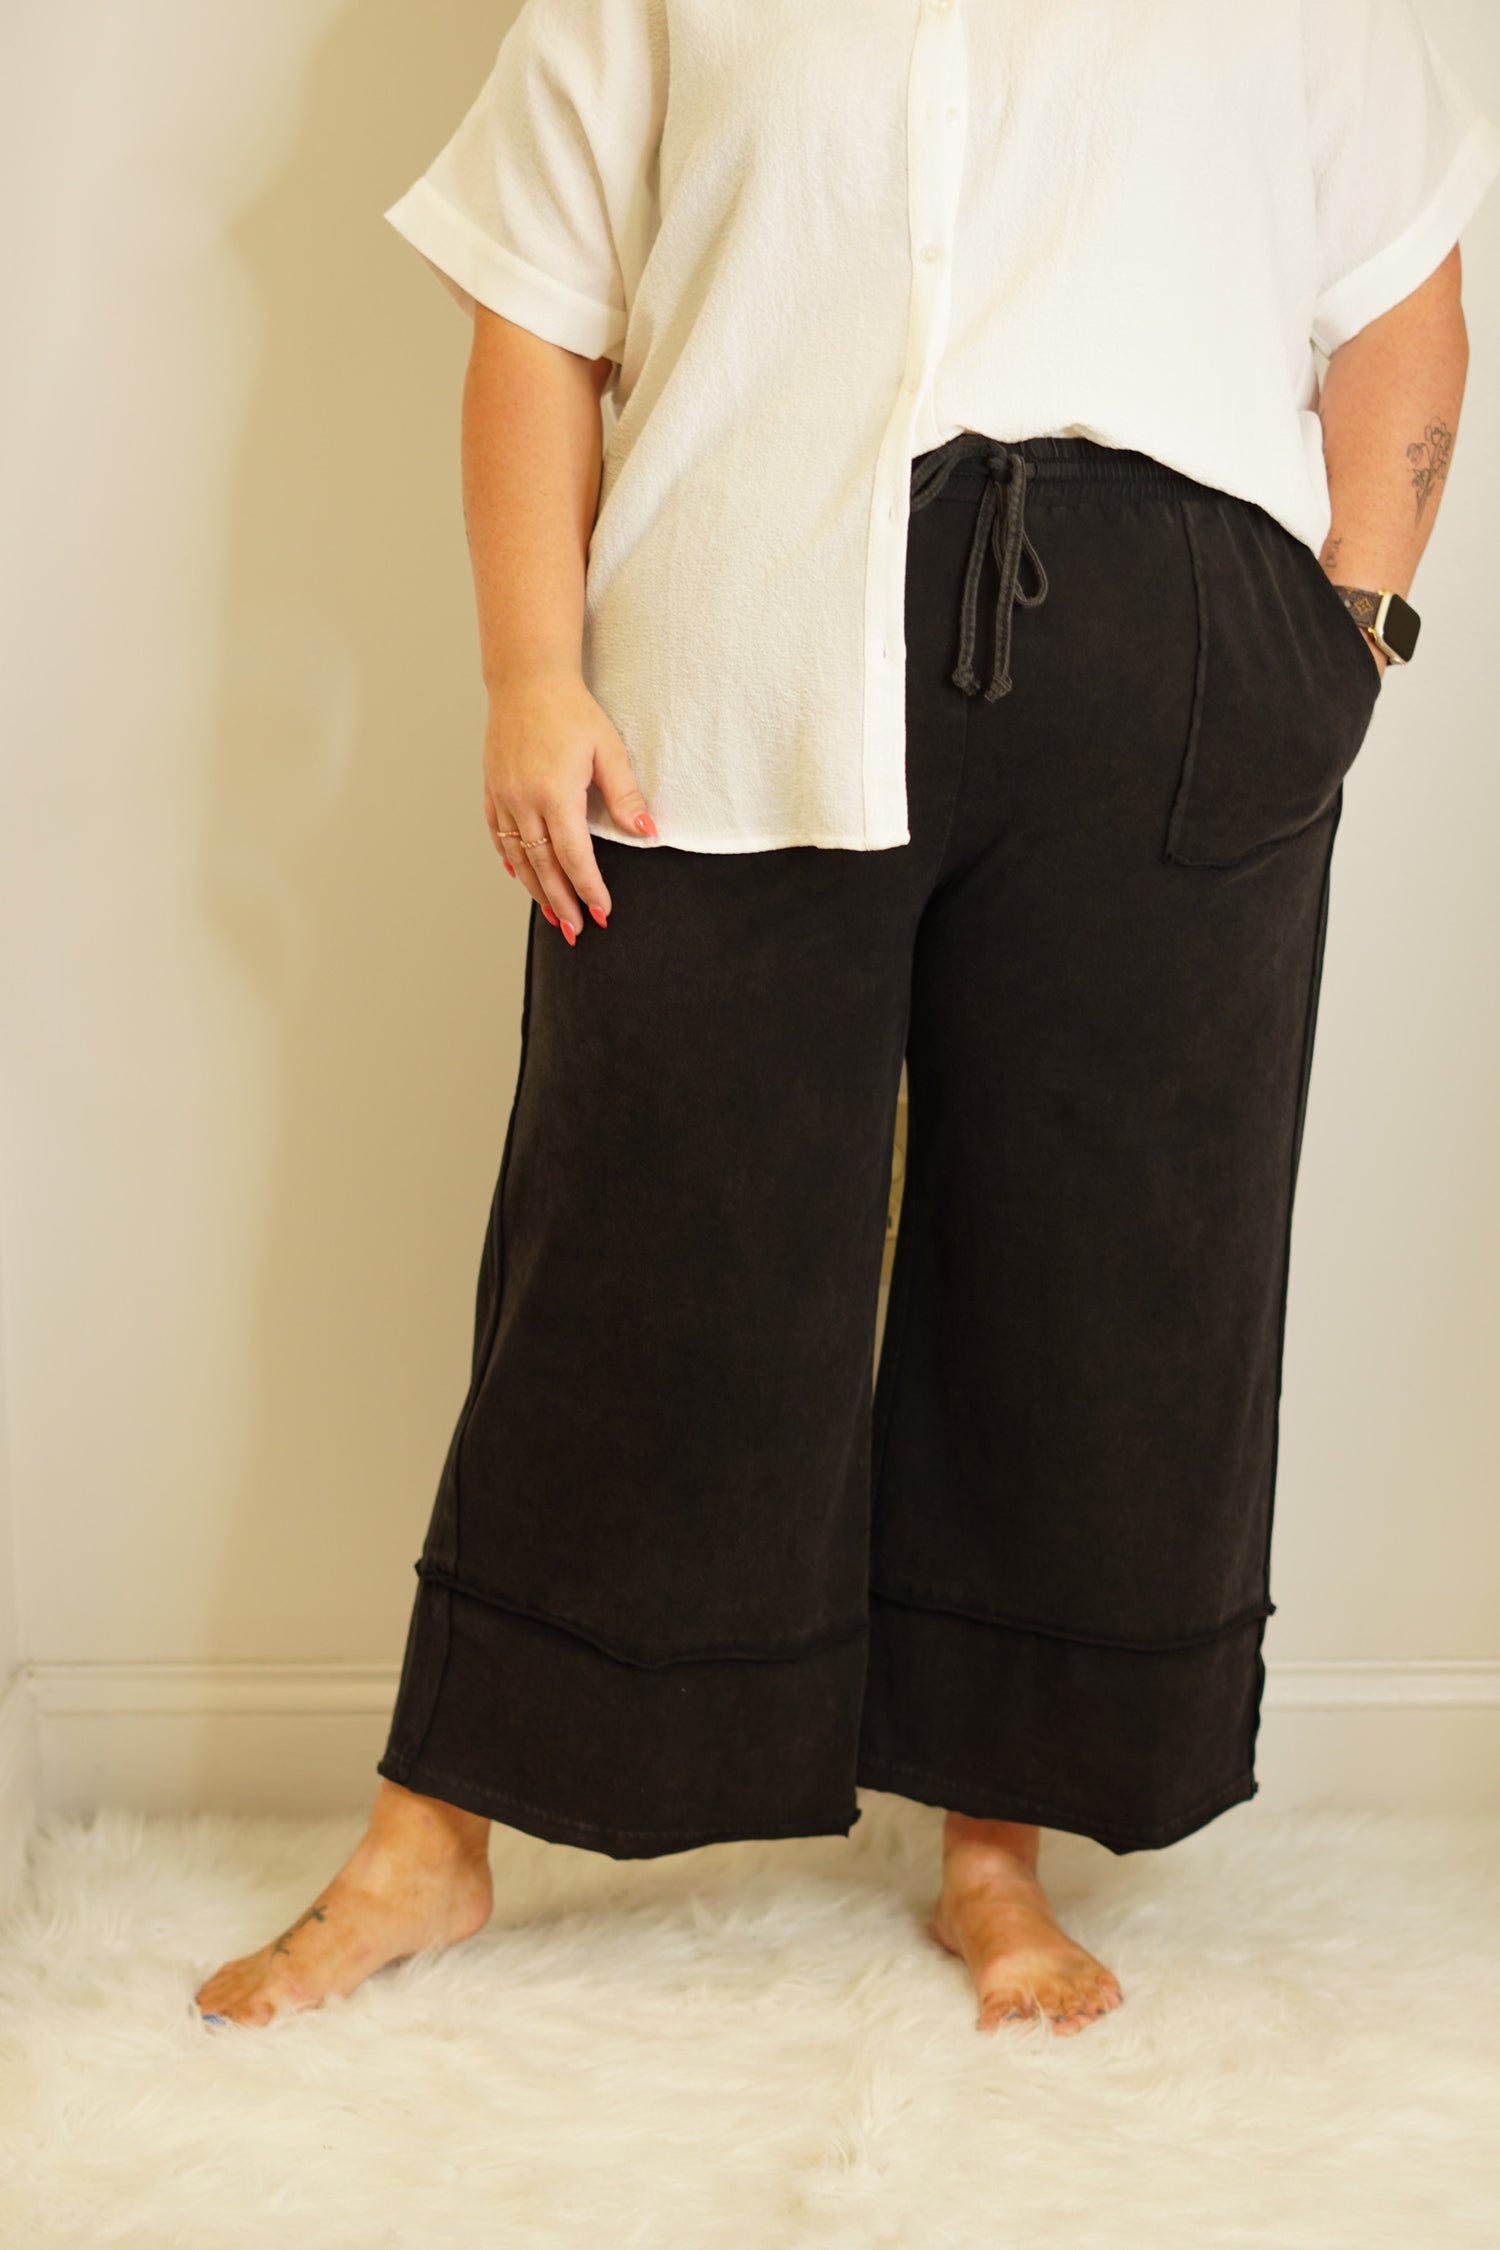 Darla Lush Capri Pants Wide Leg Back Washed  100% Cotton Hand Wash Cold, Do Not Bleach, Low Iron If Needed